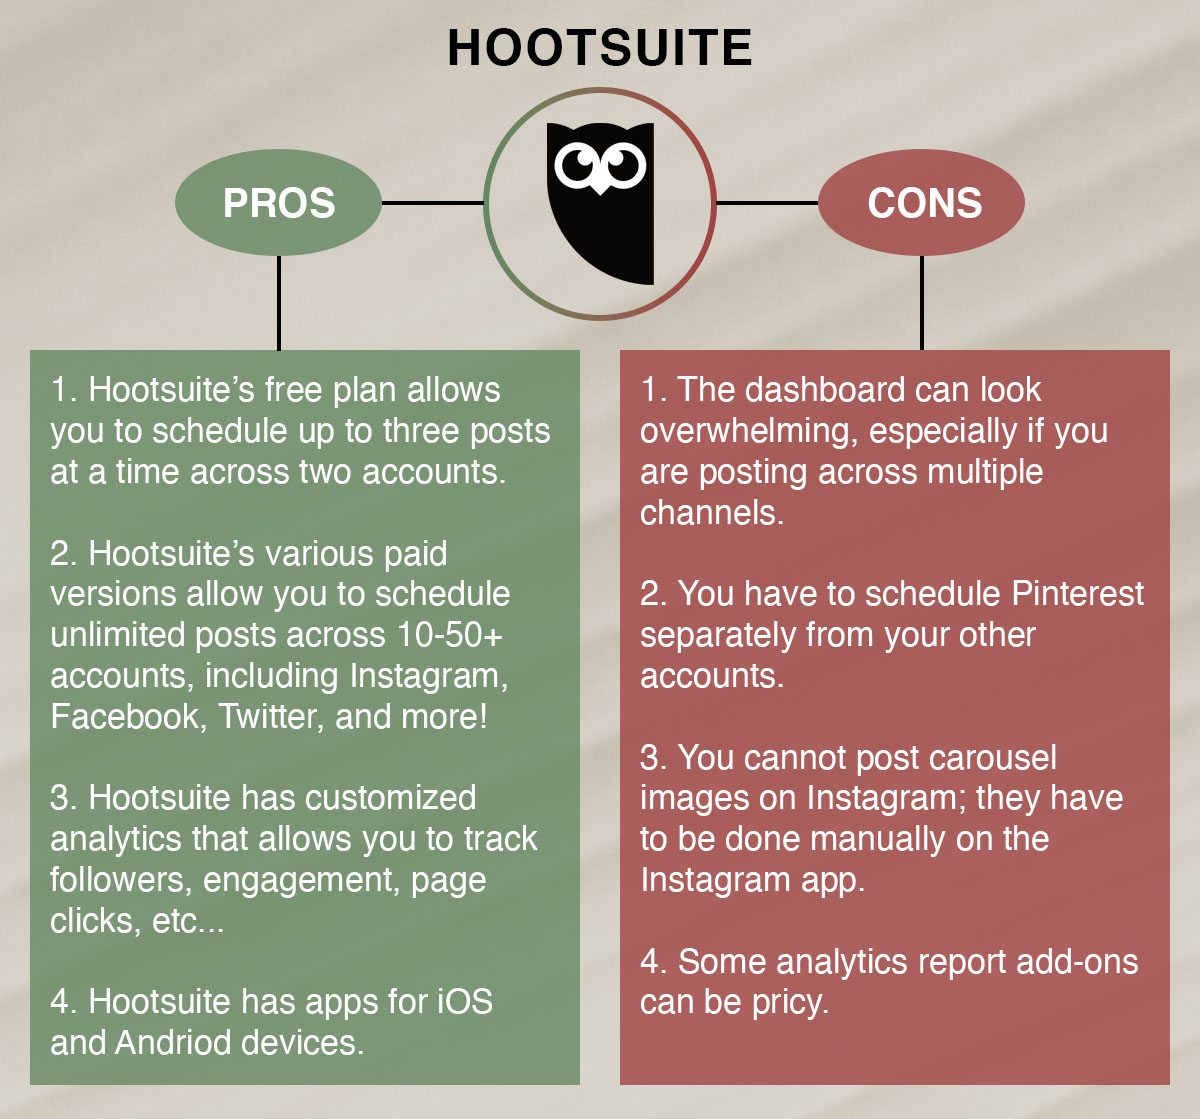 pros and cons of Hootsuite